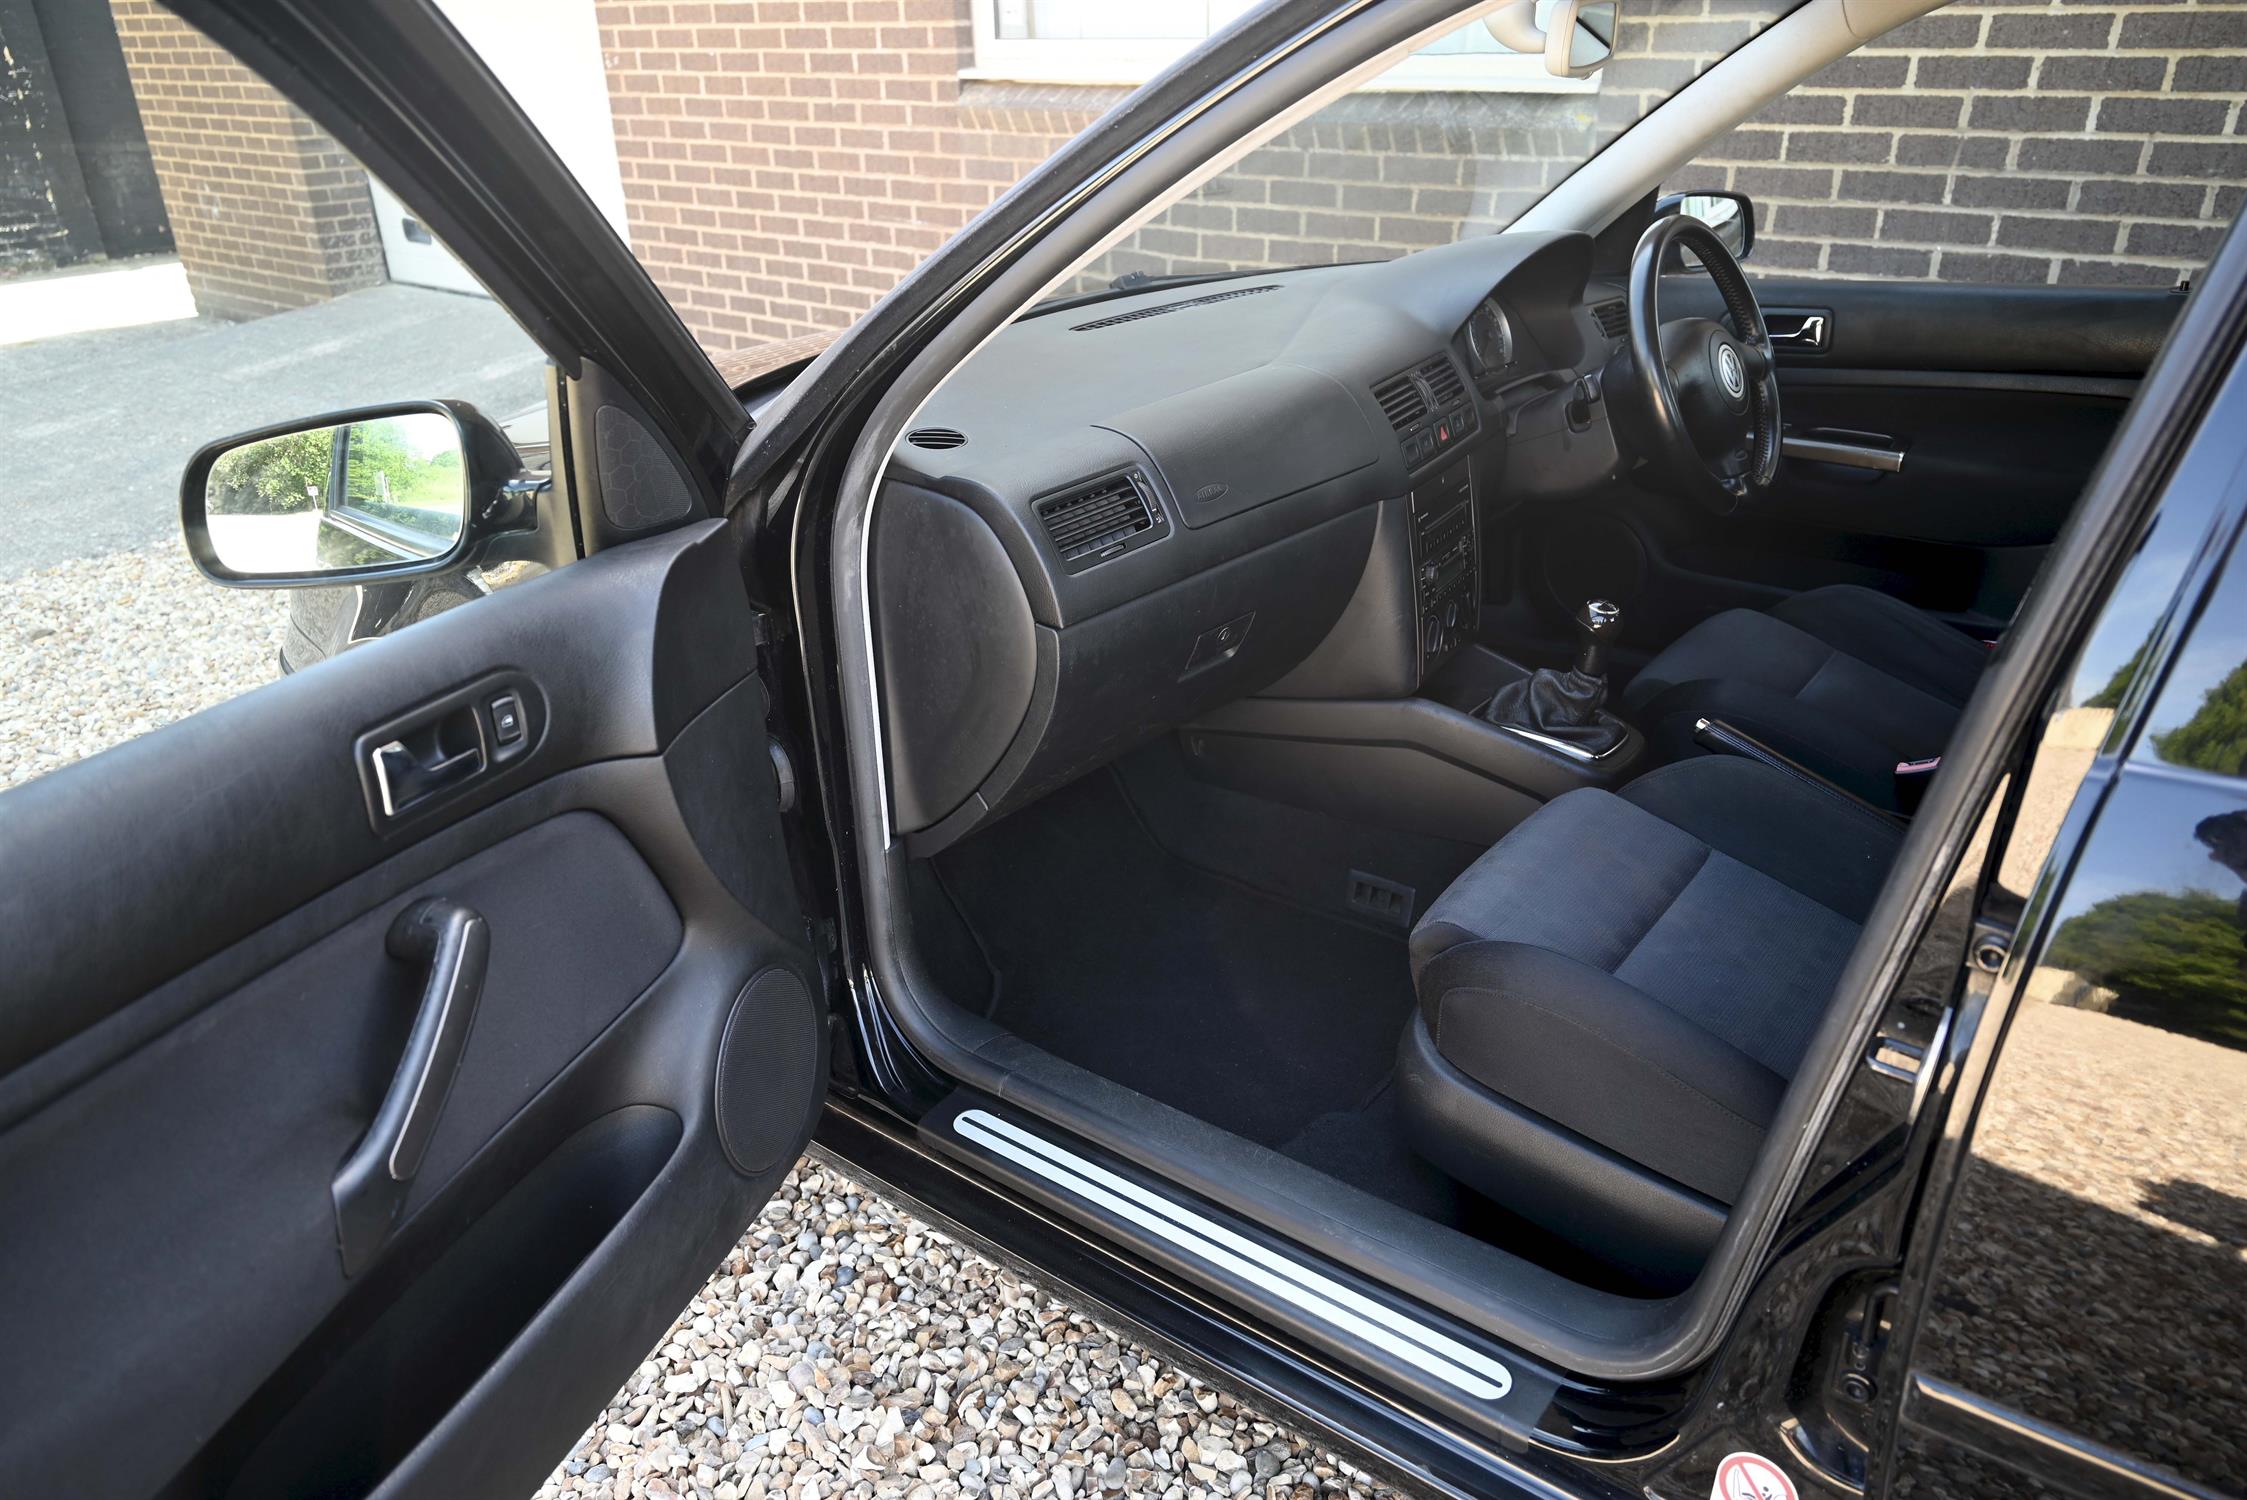 2003 (Mk 4) VW Bora ST 1.8T Black coachwork with charcoal cloth upholstery. 5-speed manual, - Image 15 of 16